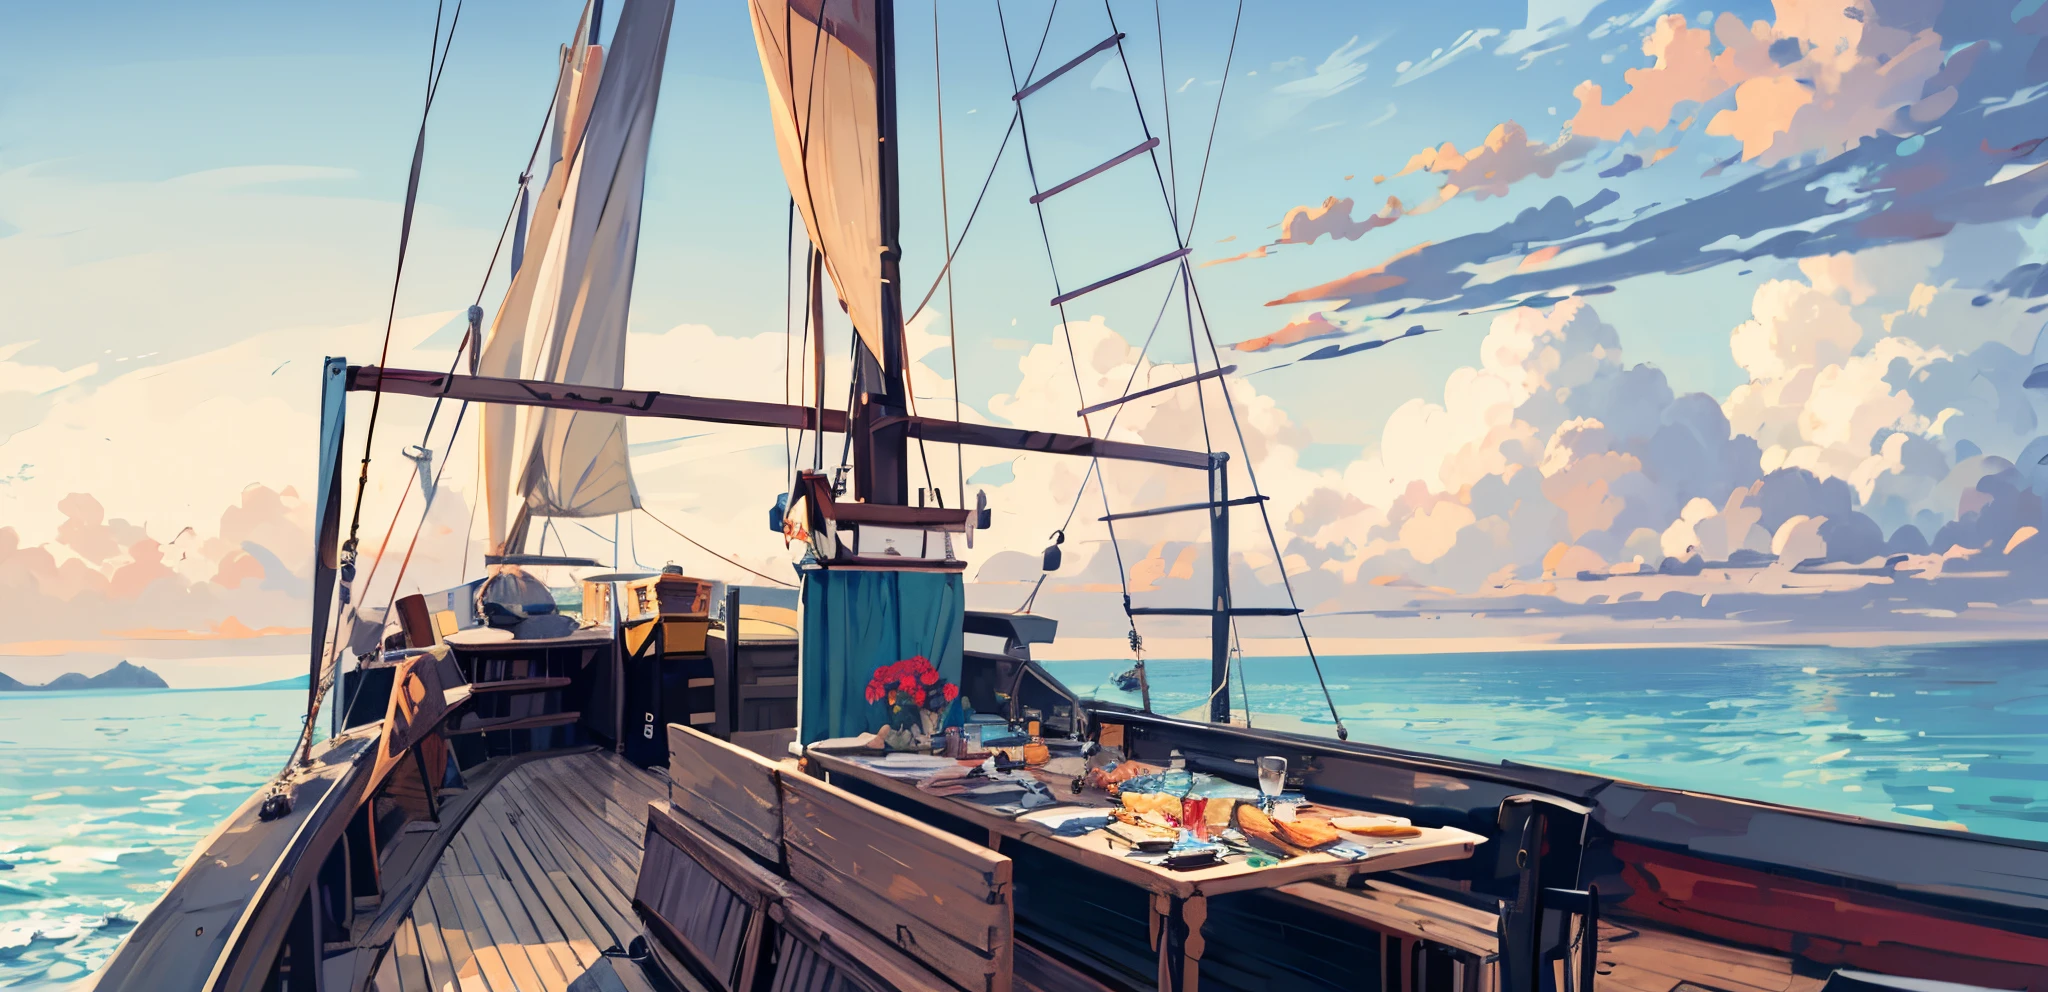 Pirate ship, local, details, day, clear, noon, ((sunny)), noon, bow details, ship,watercraft, ocean, ship, cloud, ((blue sky)), boat, scenery, outdoors, bird, water, horizon, no humans,  waves, sun